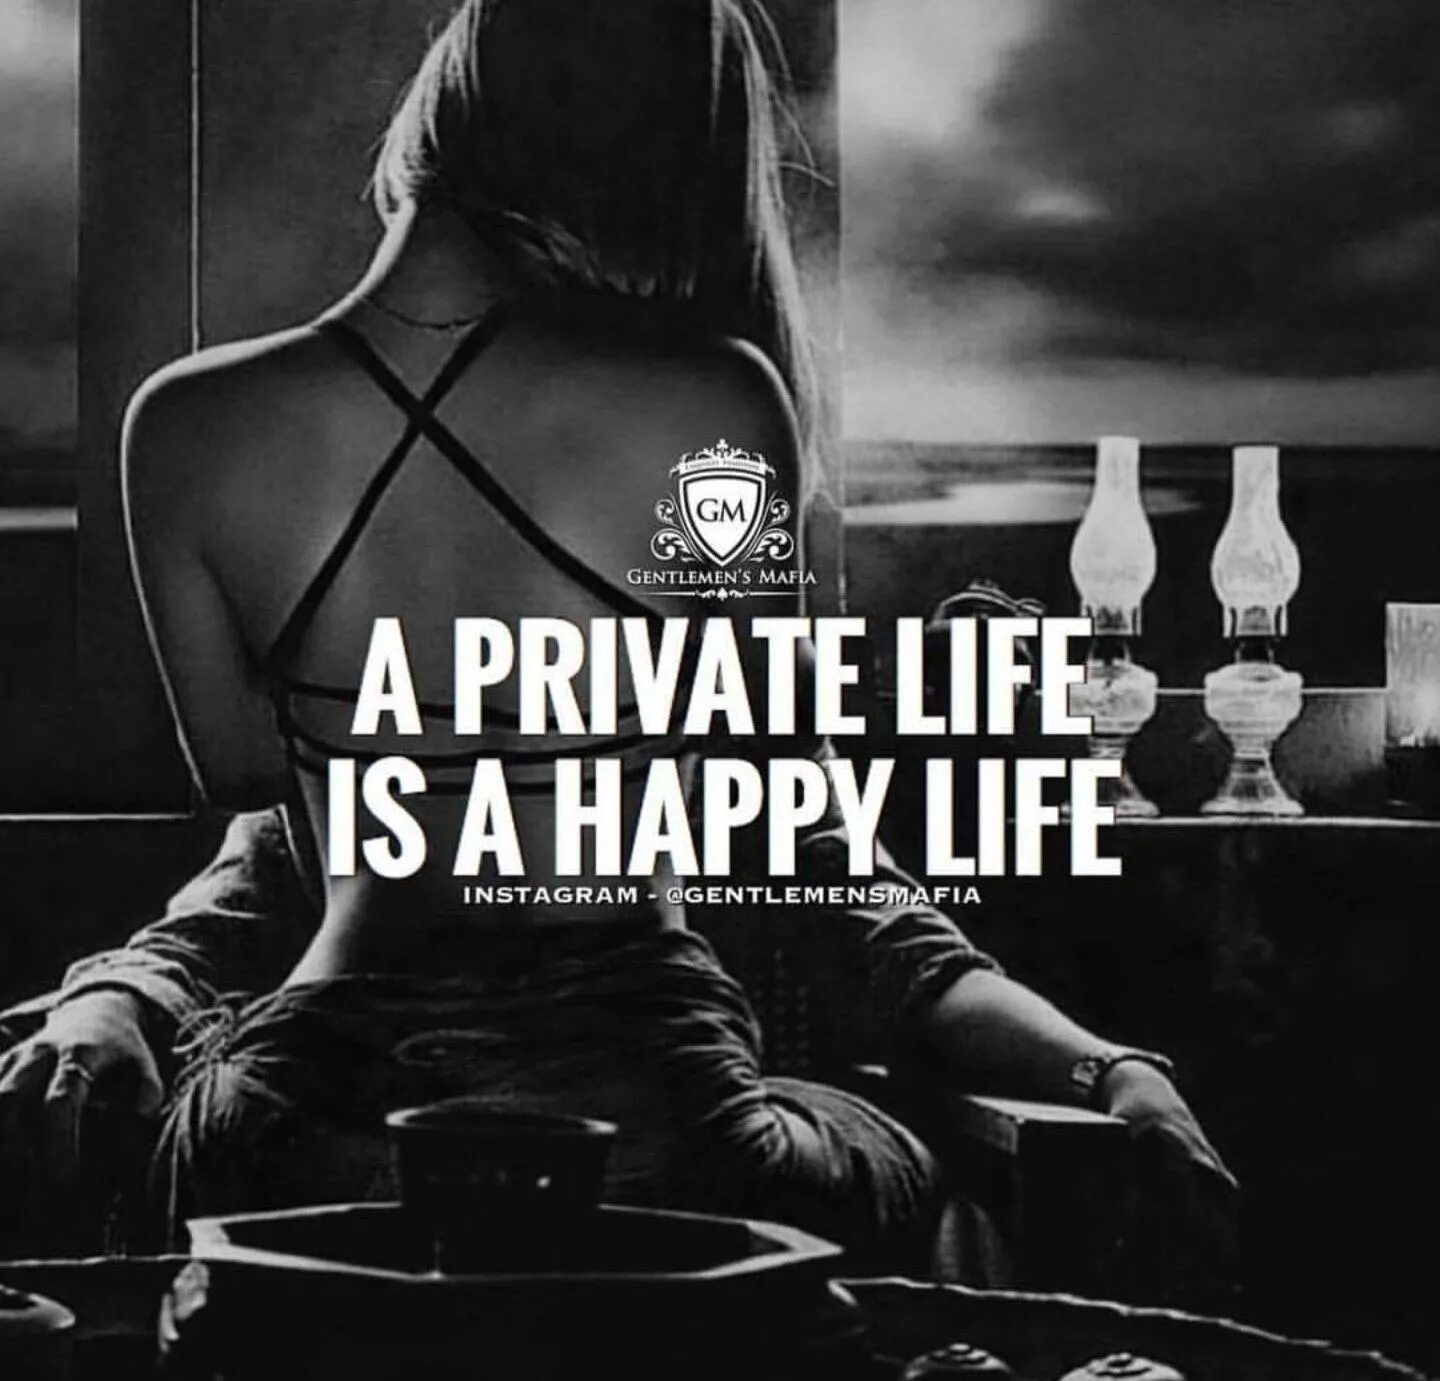 My private life. Quotes about private Life. Privat Life. Happy Life. Your_Life приват.